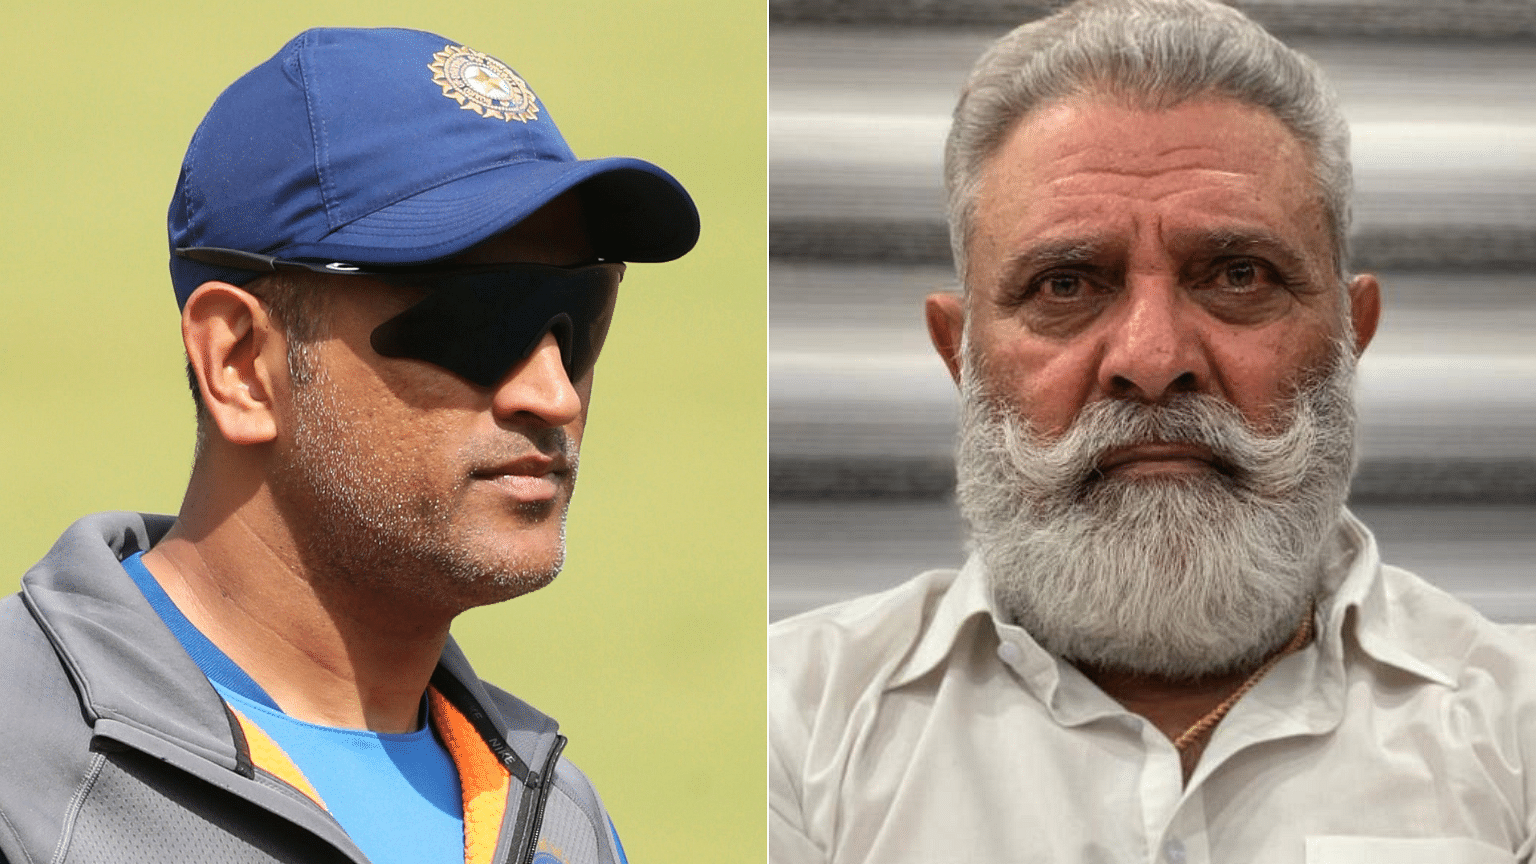 Former India pacer Yograj Singh said “filthy” people like MS Dhoni won’t be around forever.